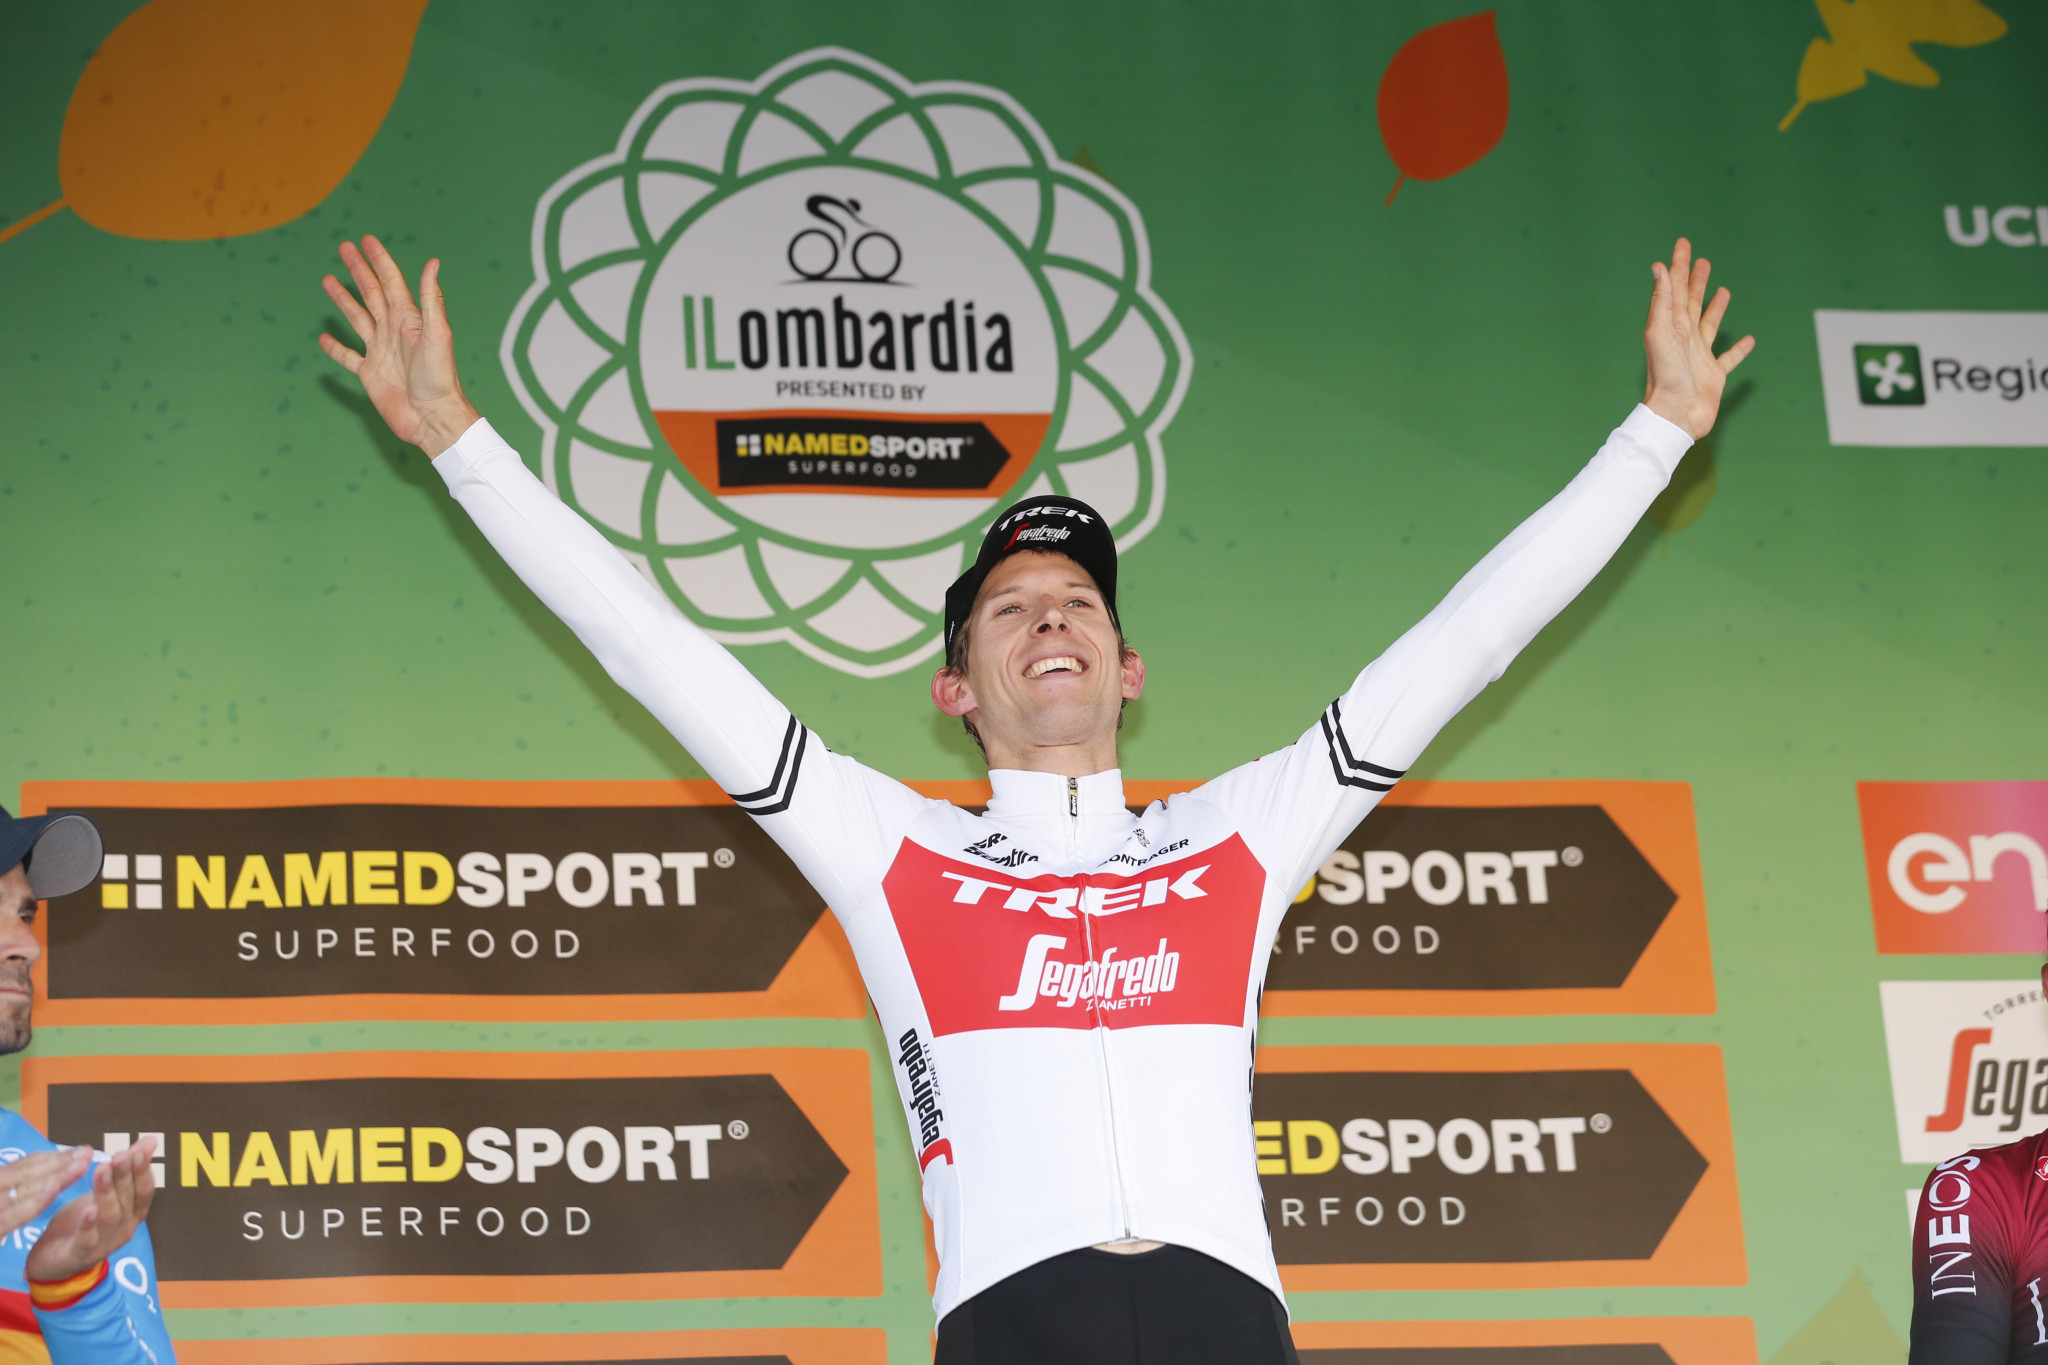 Defending champion Mollema among starters at Il Lombardia